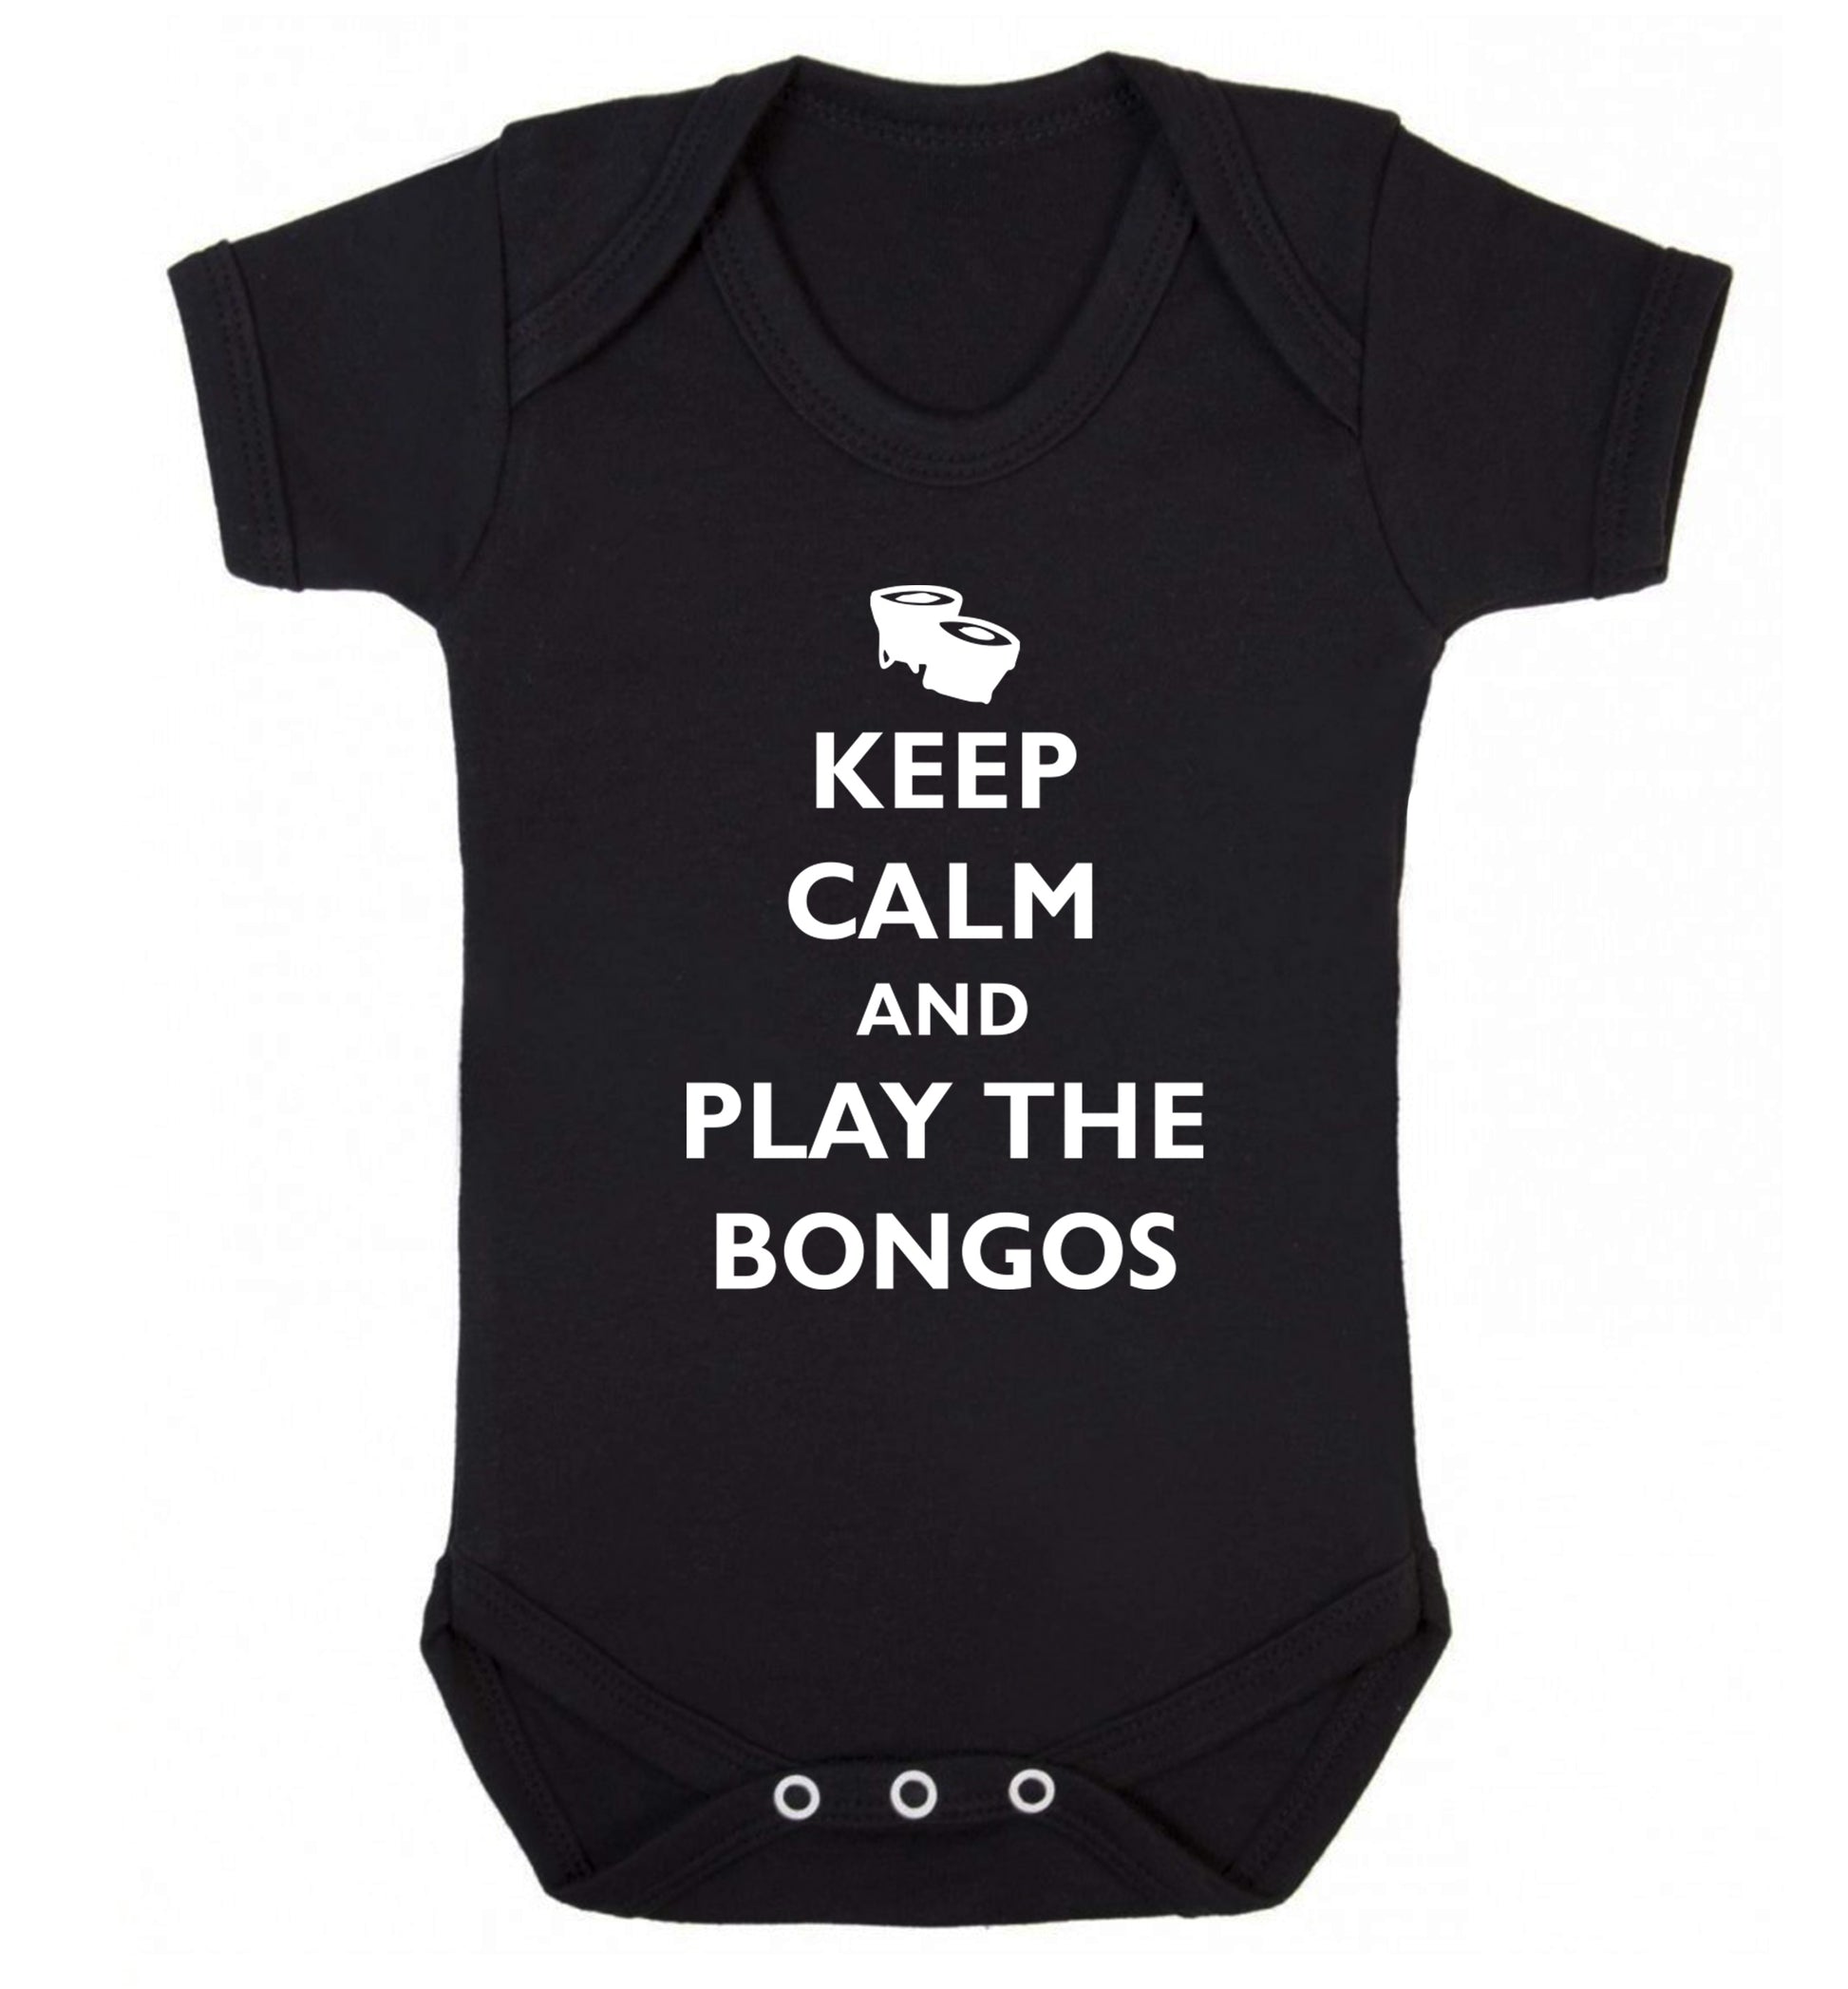 Keep calm and play the bongos Baby Vest black 18-24 months